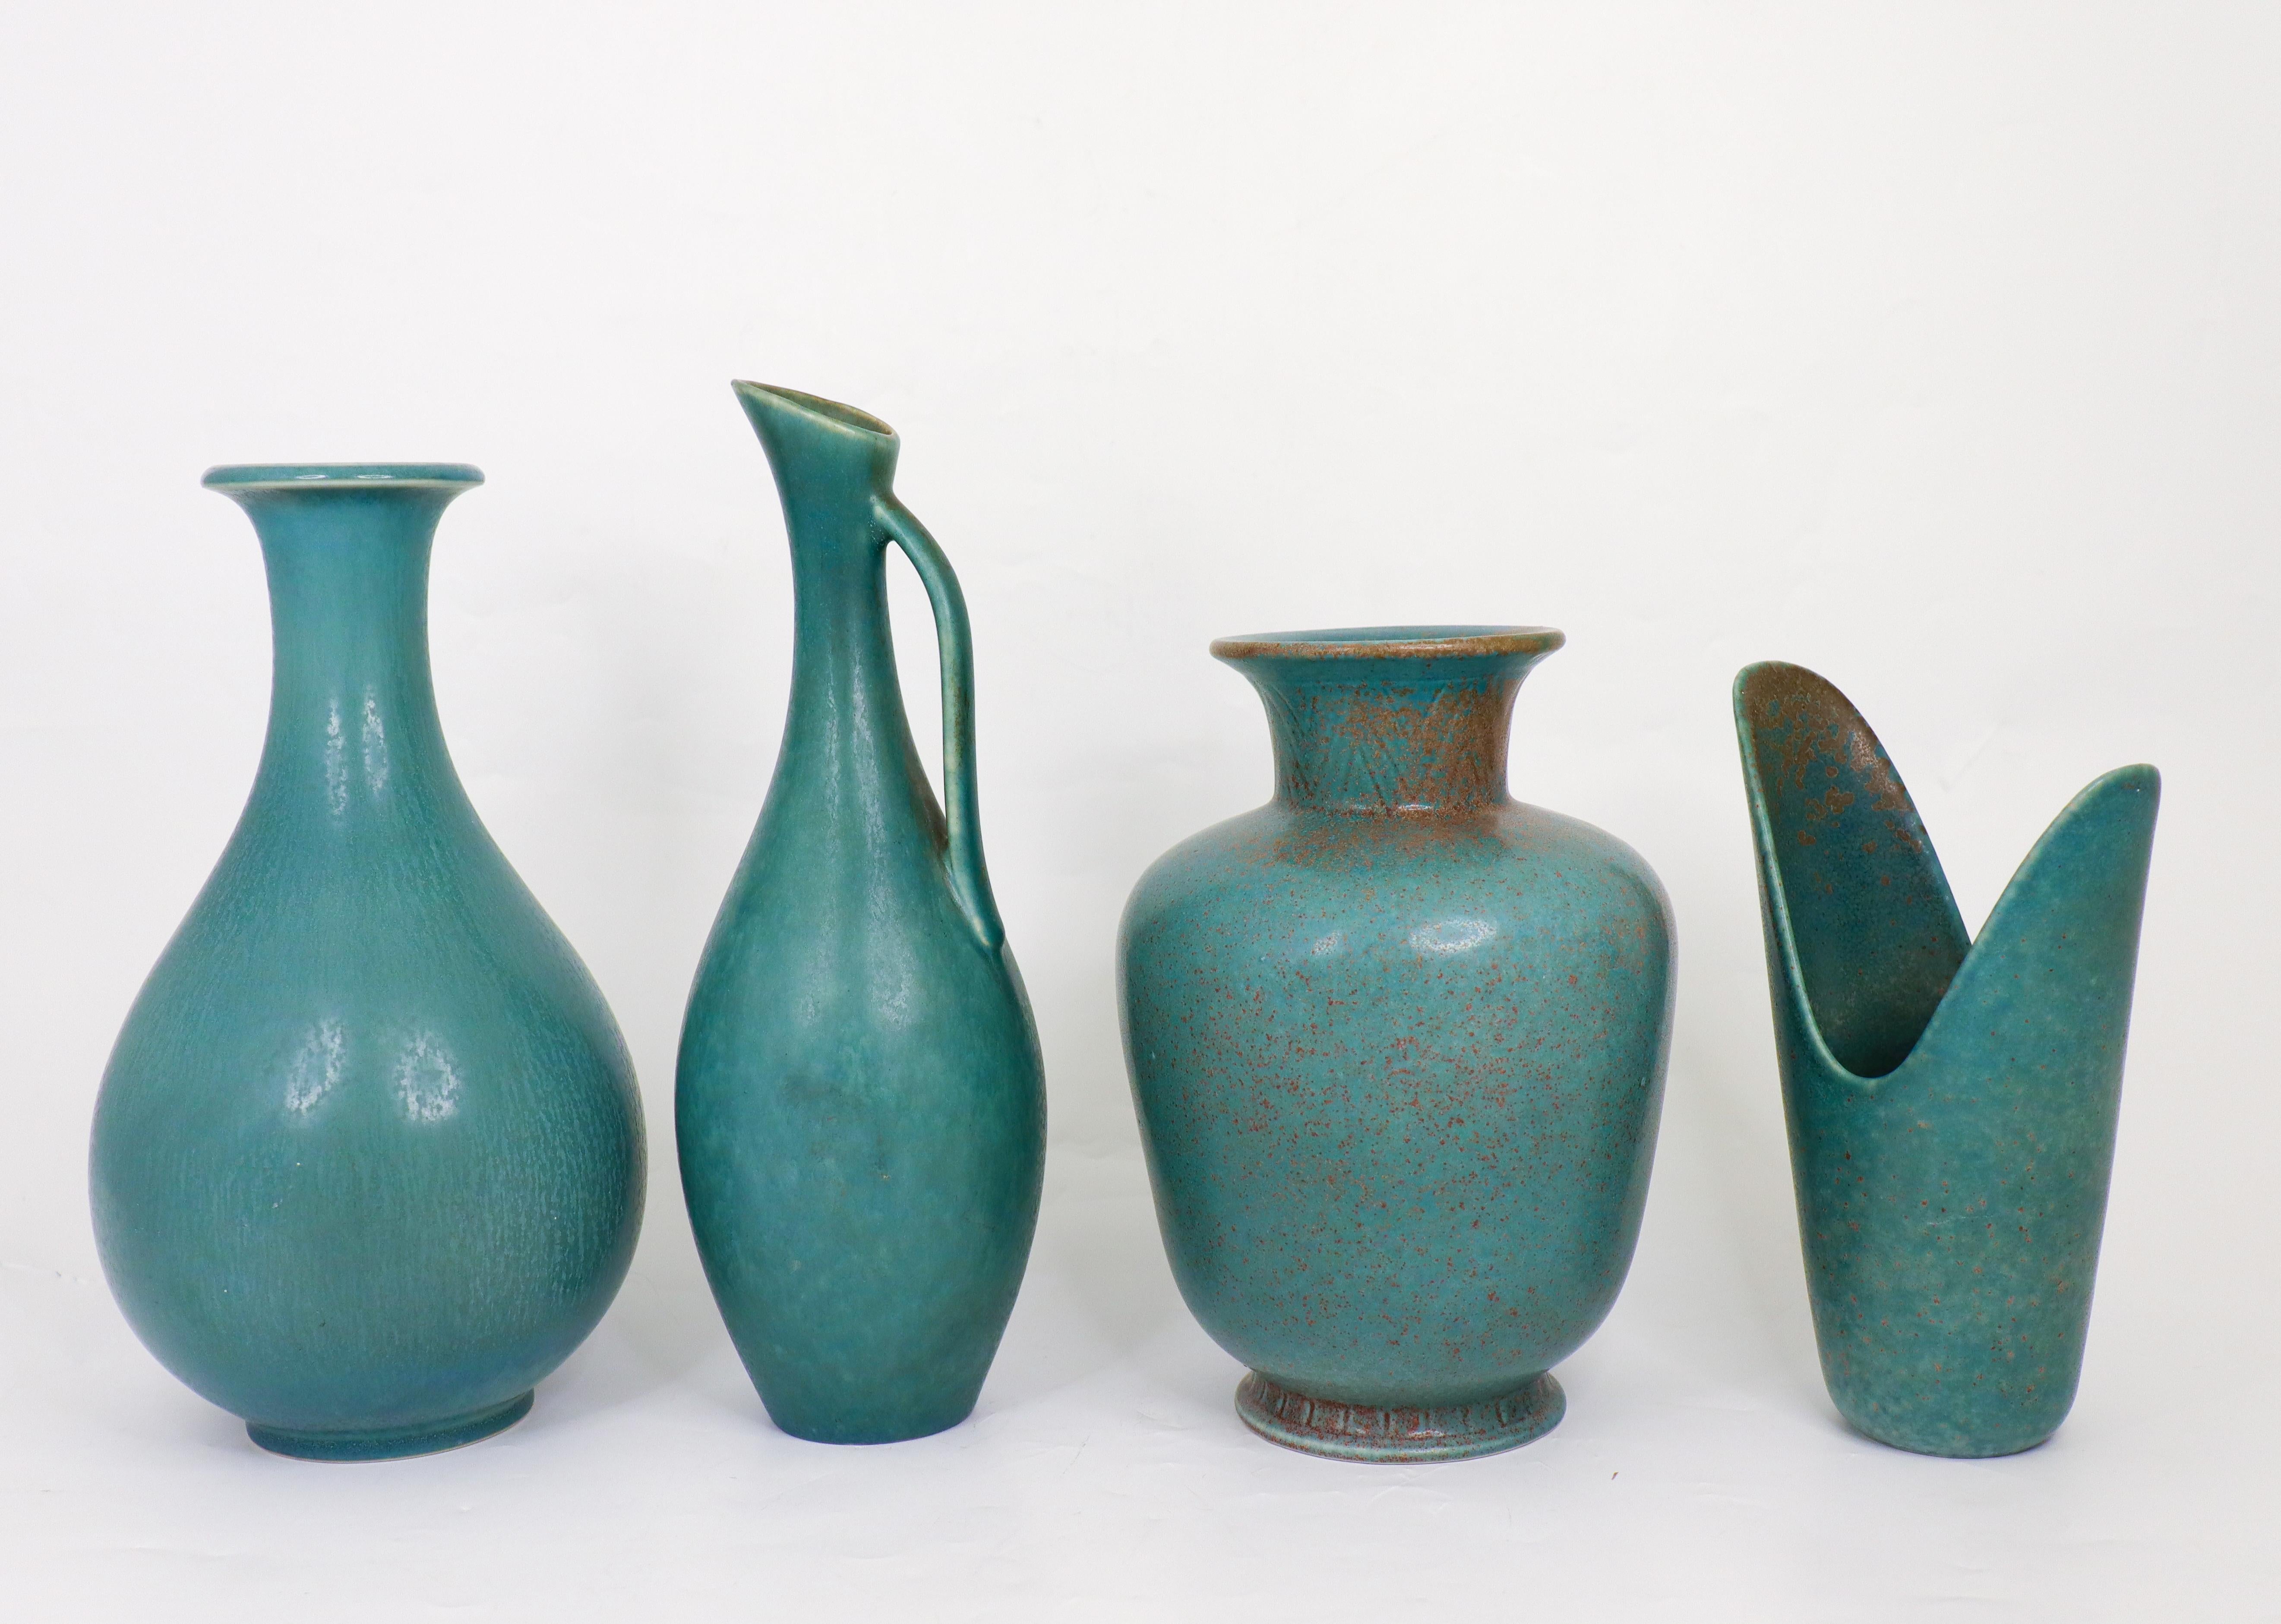 A group of four vases with a stunning glaze designed by Gunnar Nylund at Rörstrand in the 1950s. The vases are between 18.5 - 26 cm high and in excellent condition. They are all marked as 1st quality. 

Carl-Harry Stålhane is one of the top names